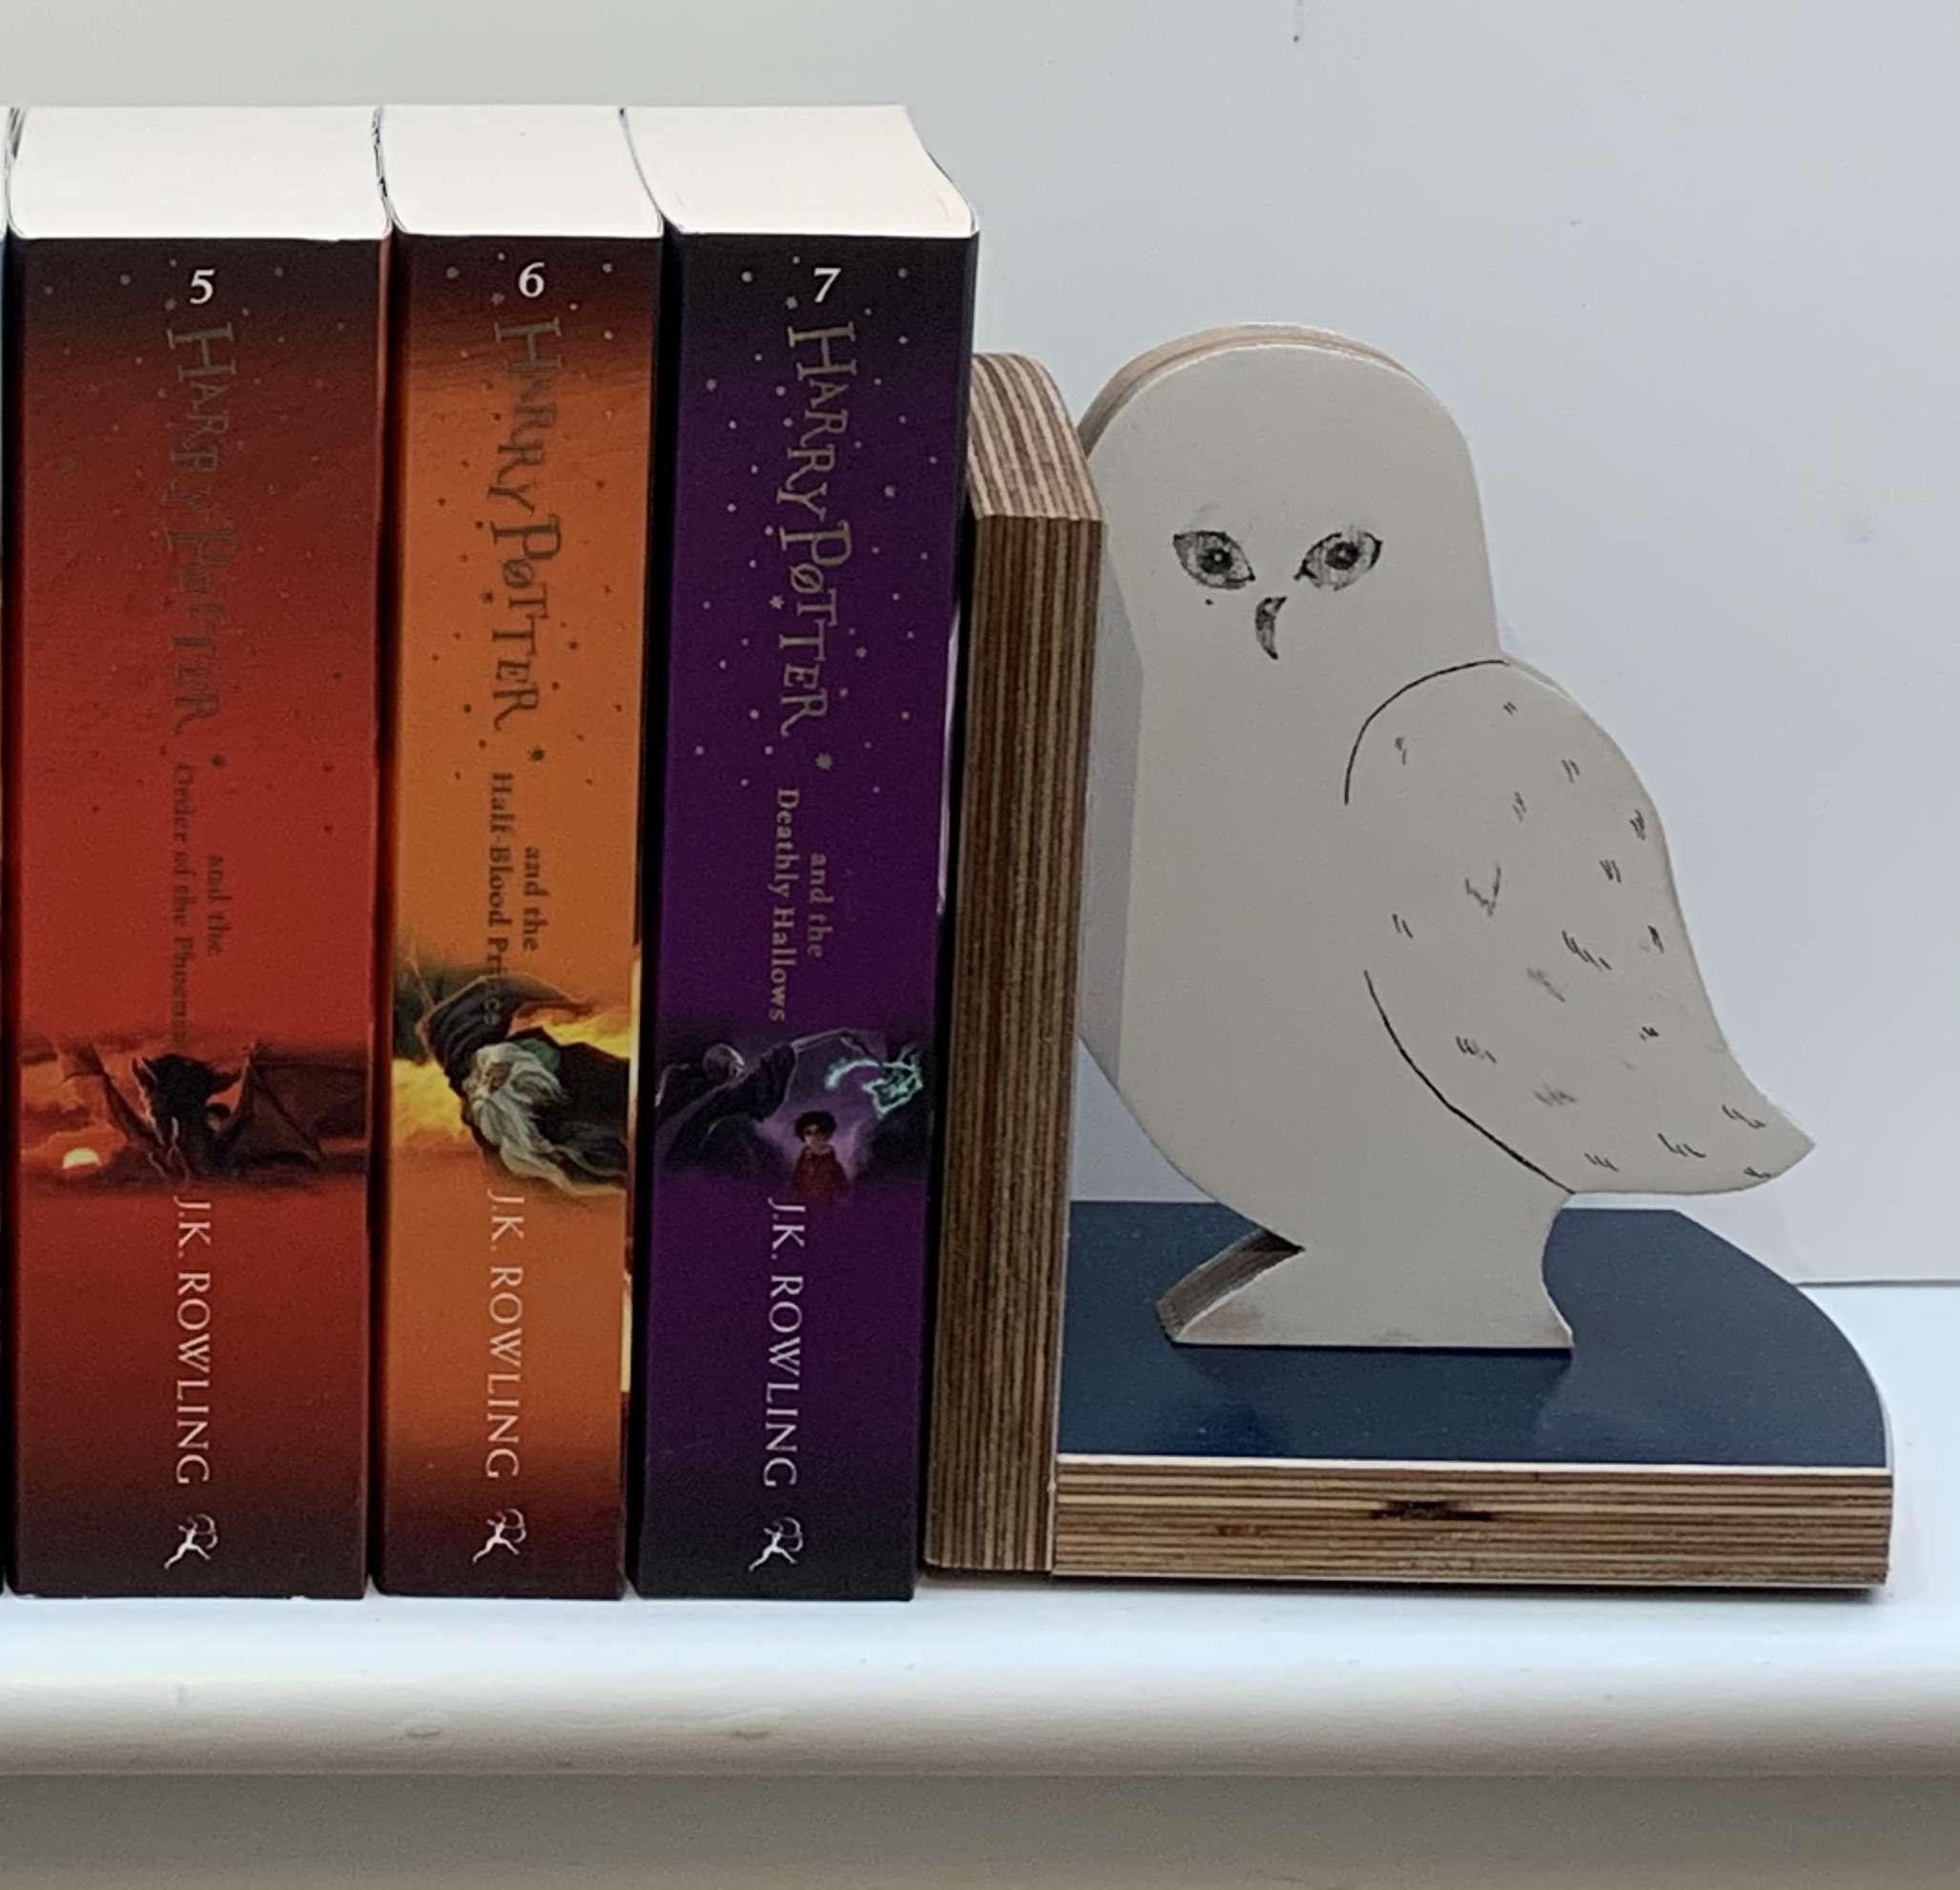 owl bookends for kids